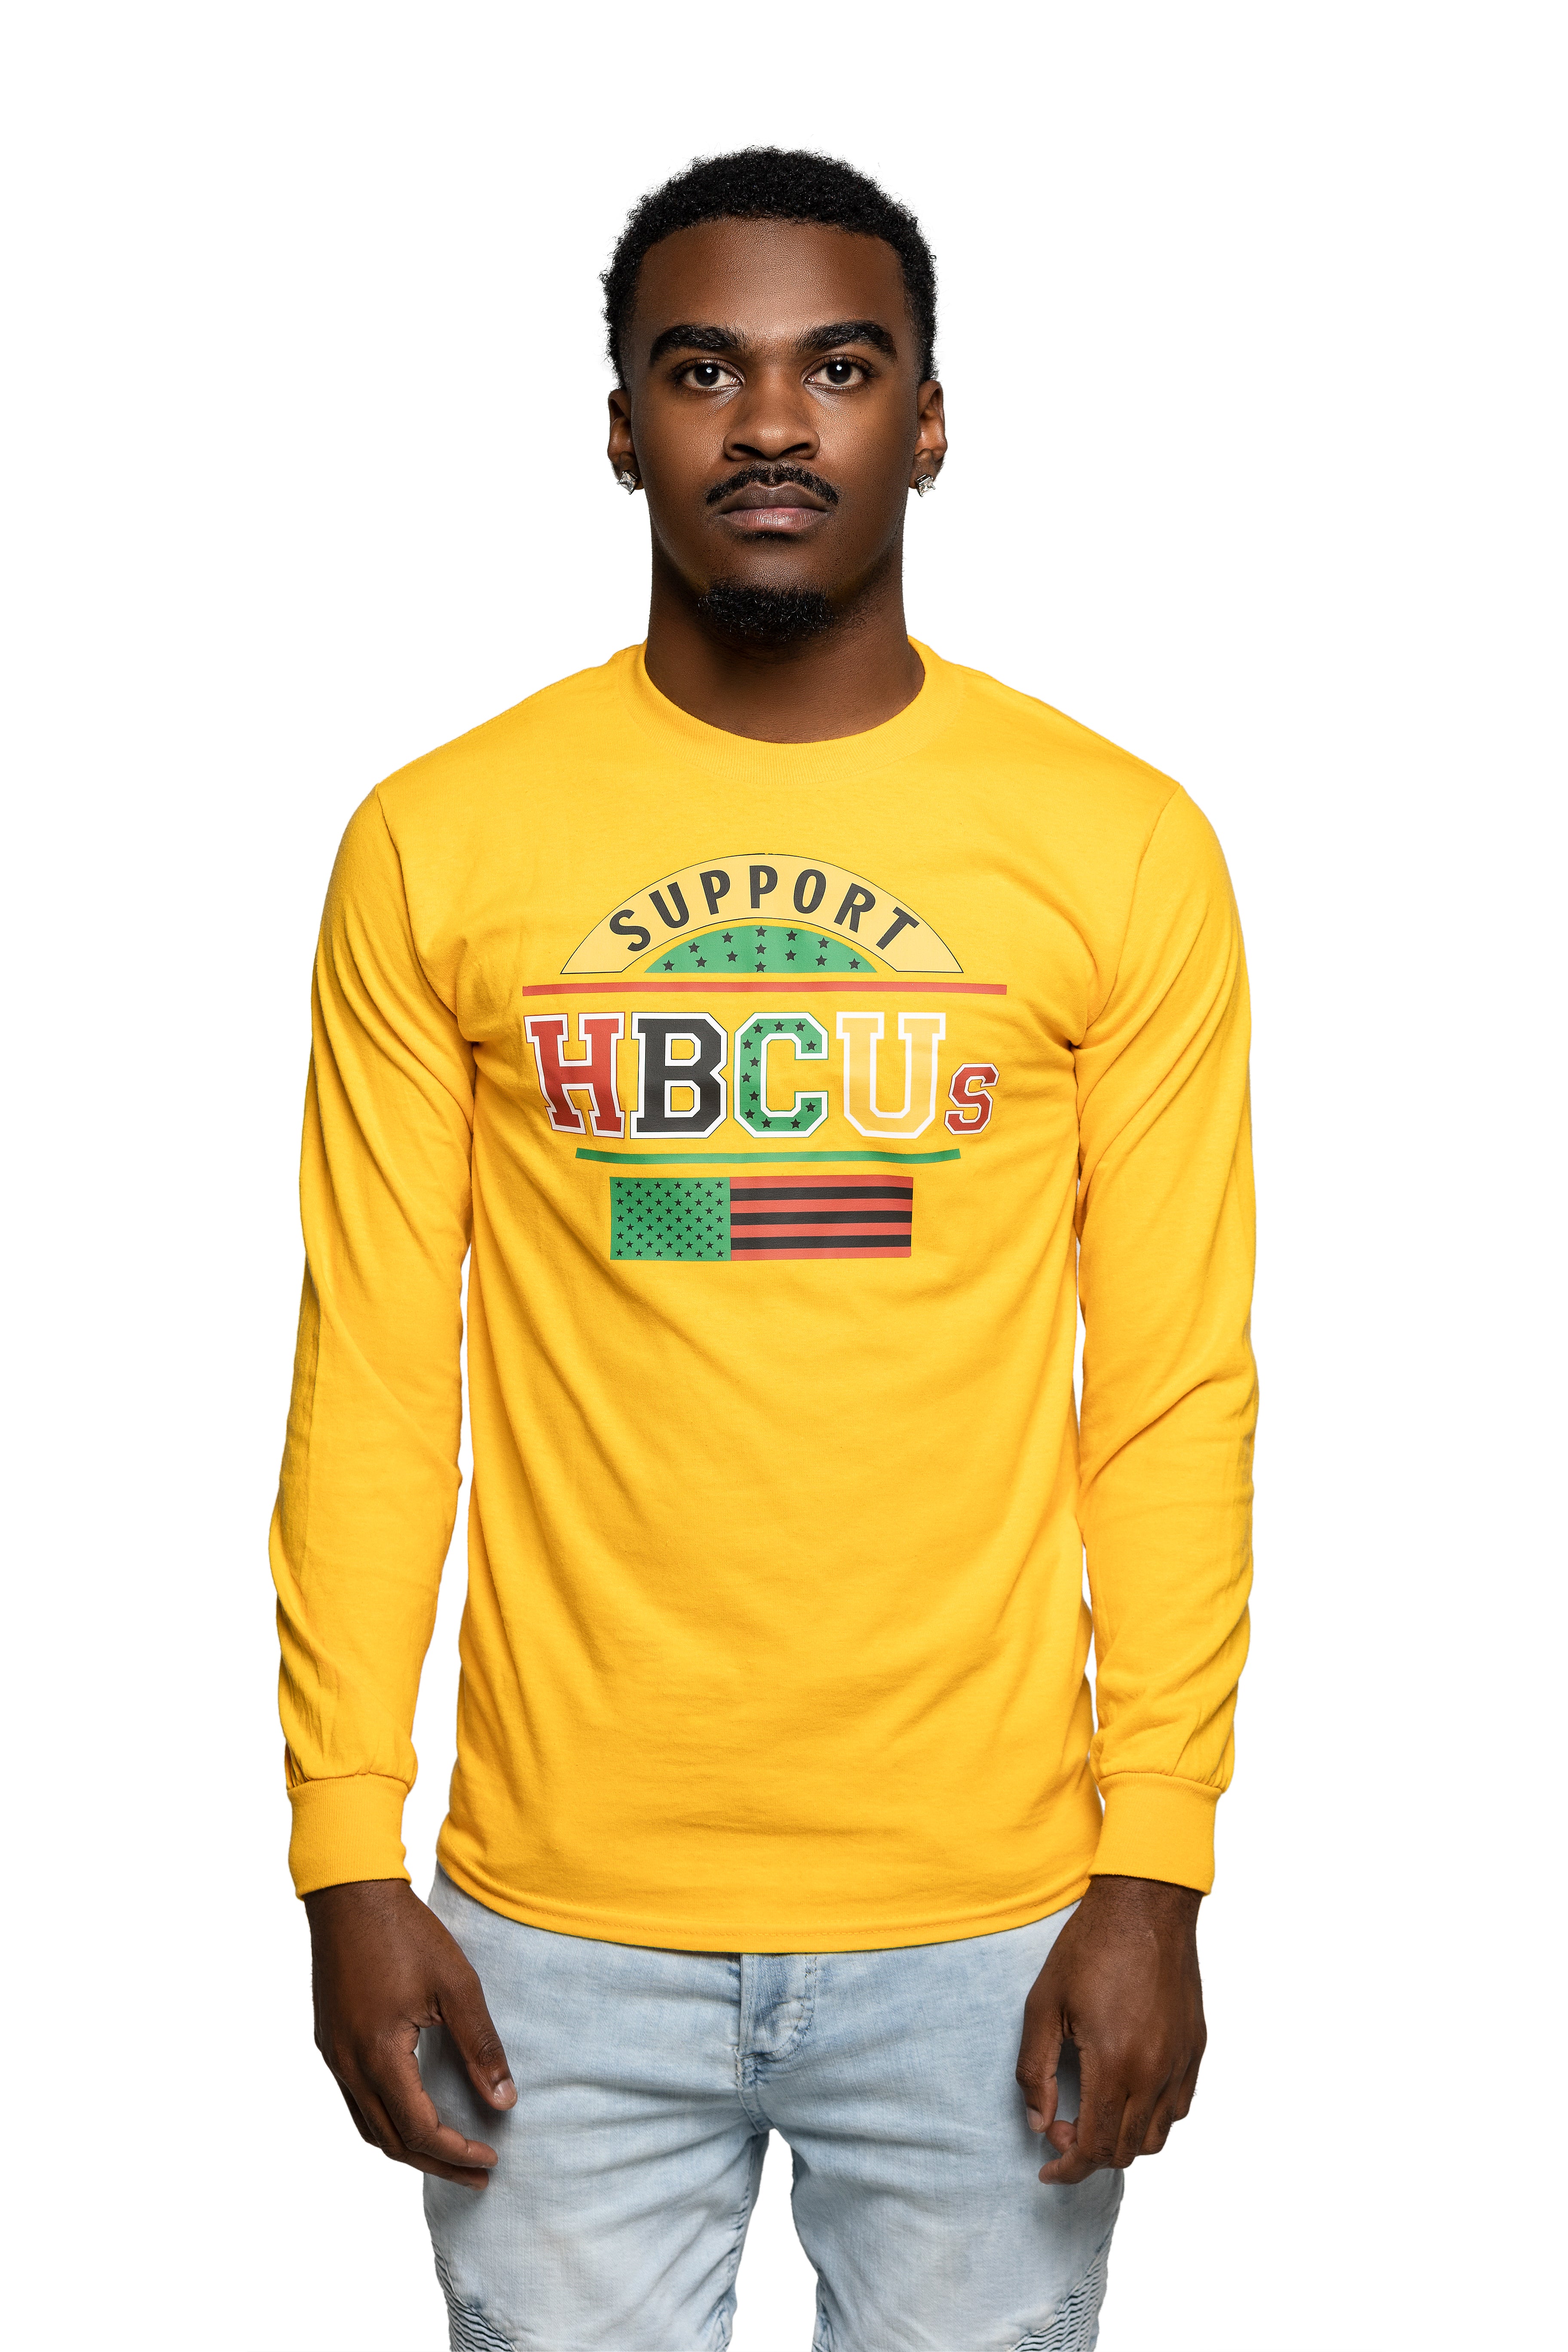 GOLD SUPPORT HBCUs LONG SLEEVES TEE